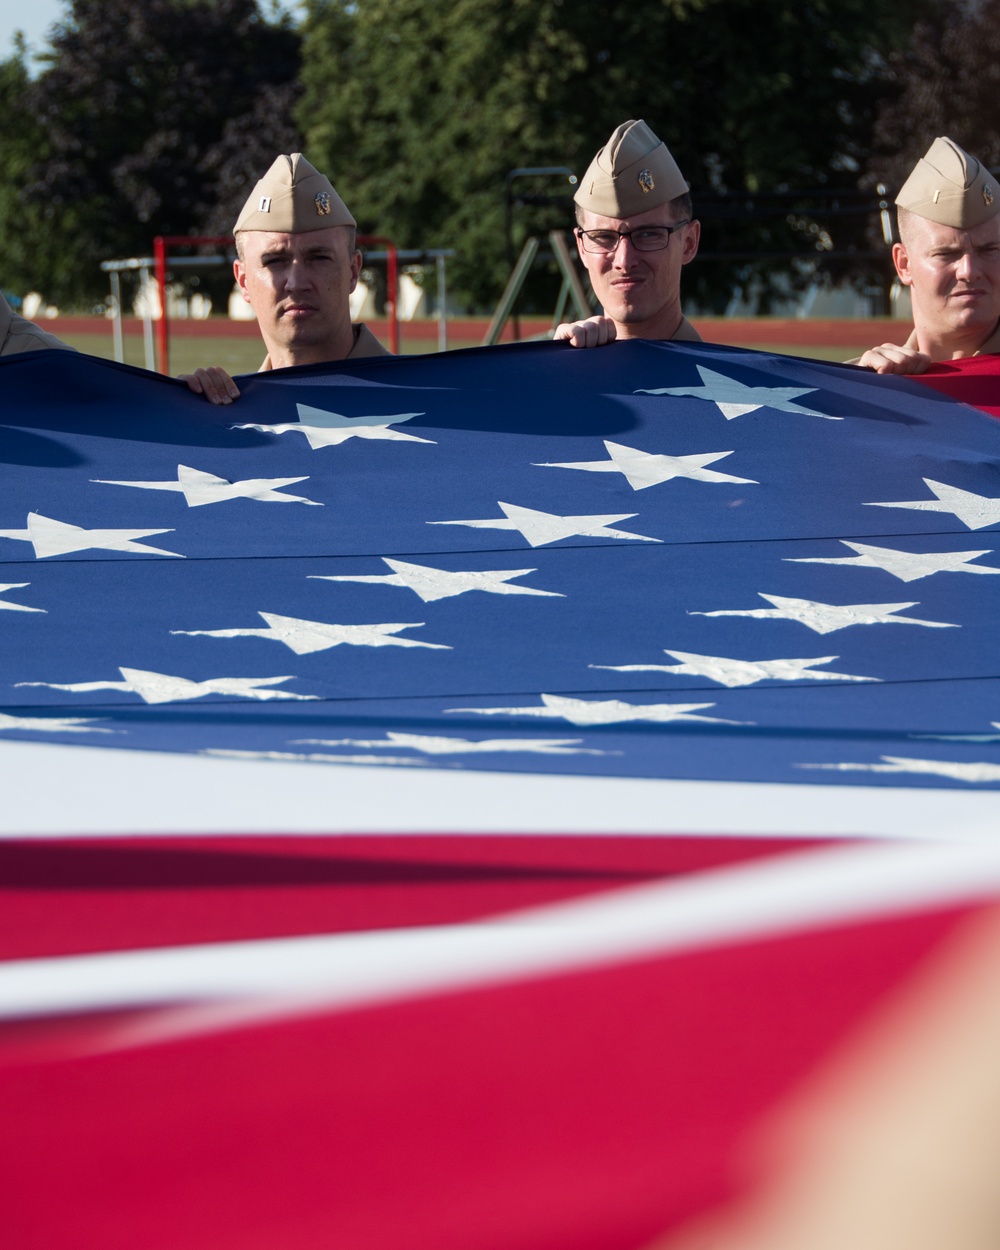 Graduating class 19050 of Officer Development School (ODS) here at Officer Training Command, Newport, Rhode Island, conduct a flag ceremony on Aug. 8, 2019.